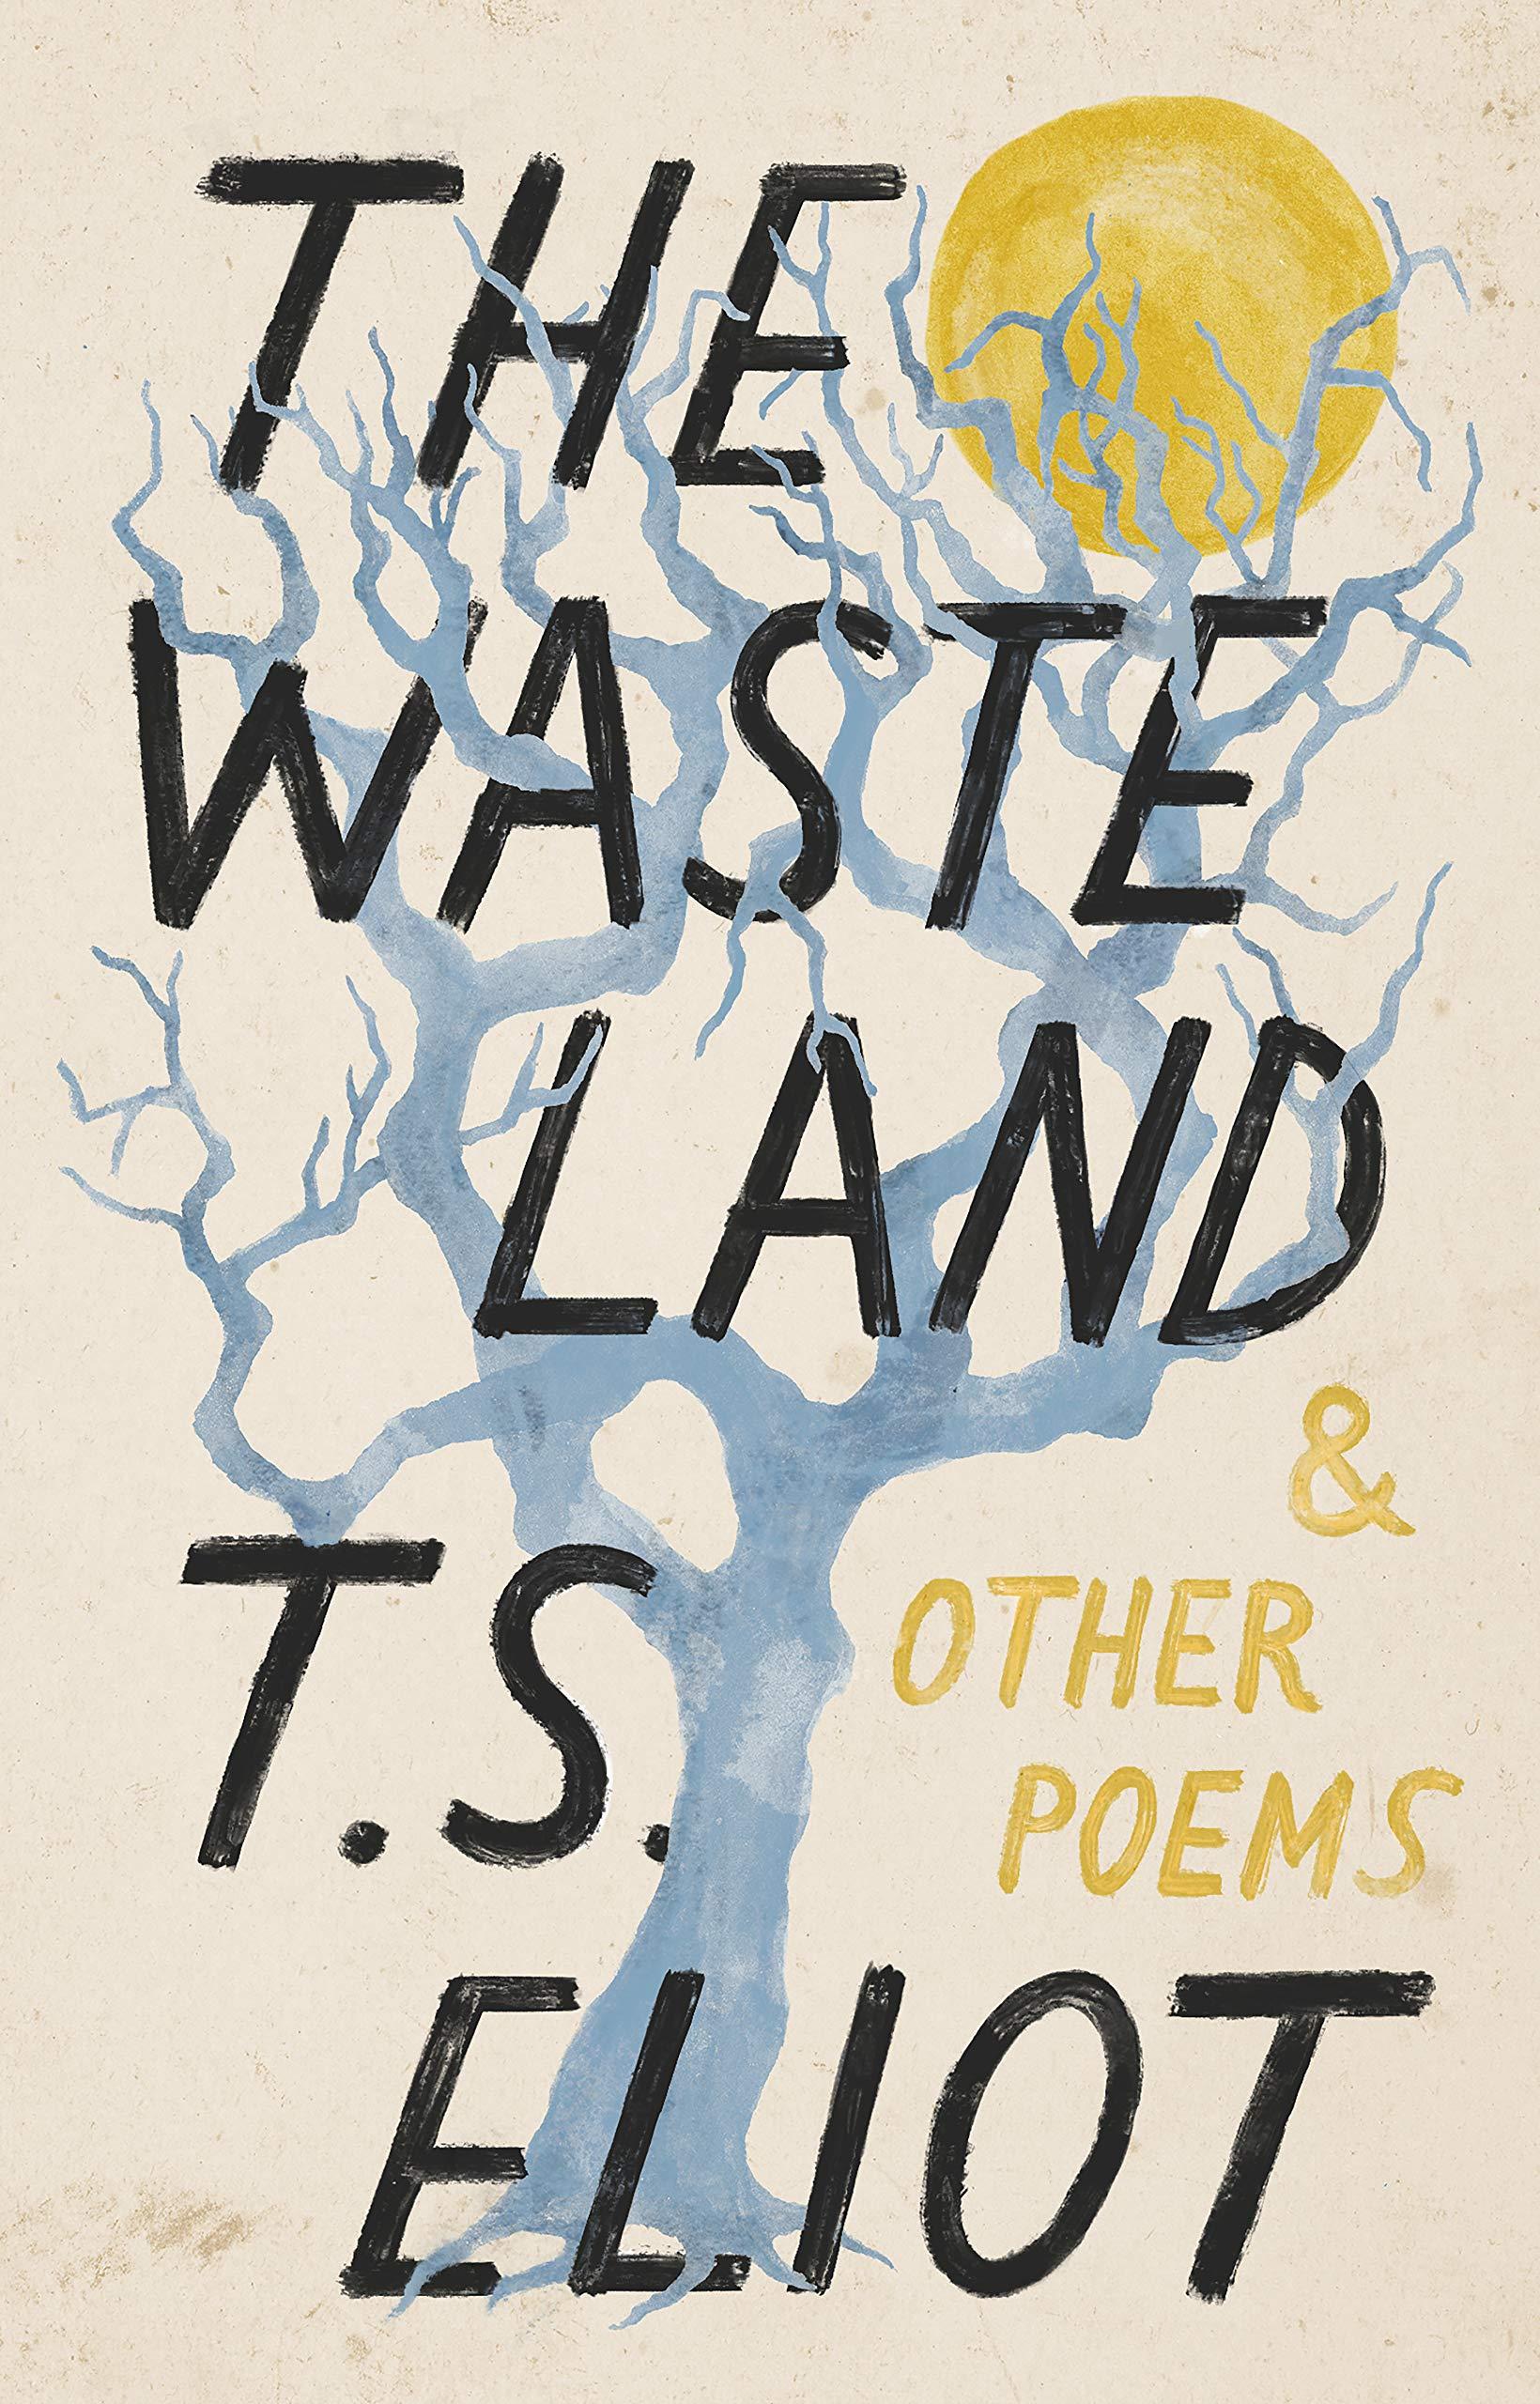 T.S. Eliot “The Waste Land”